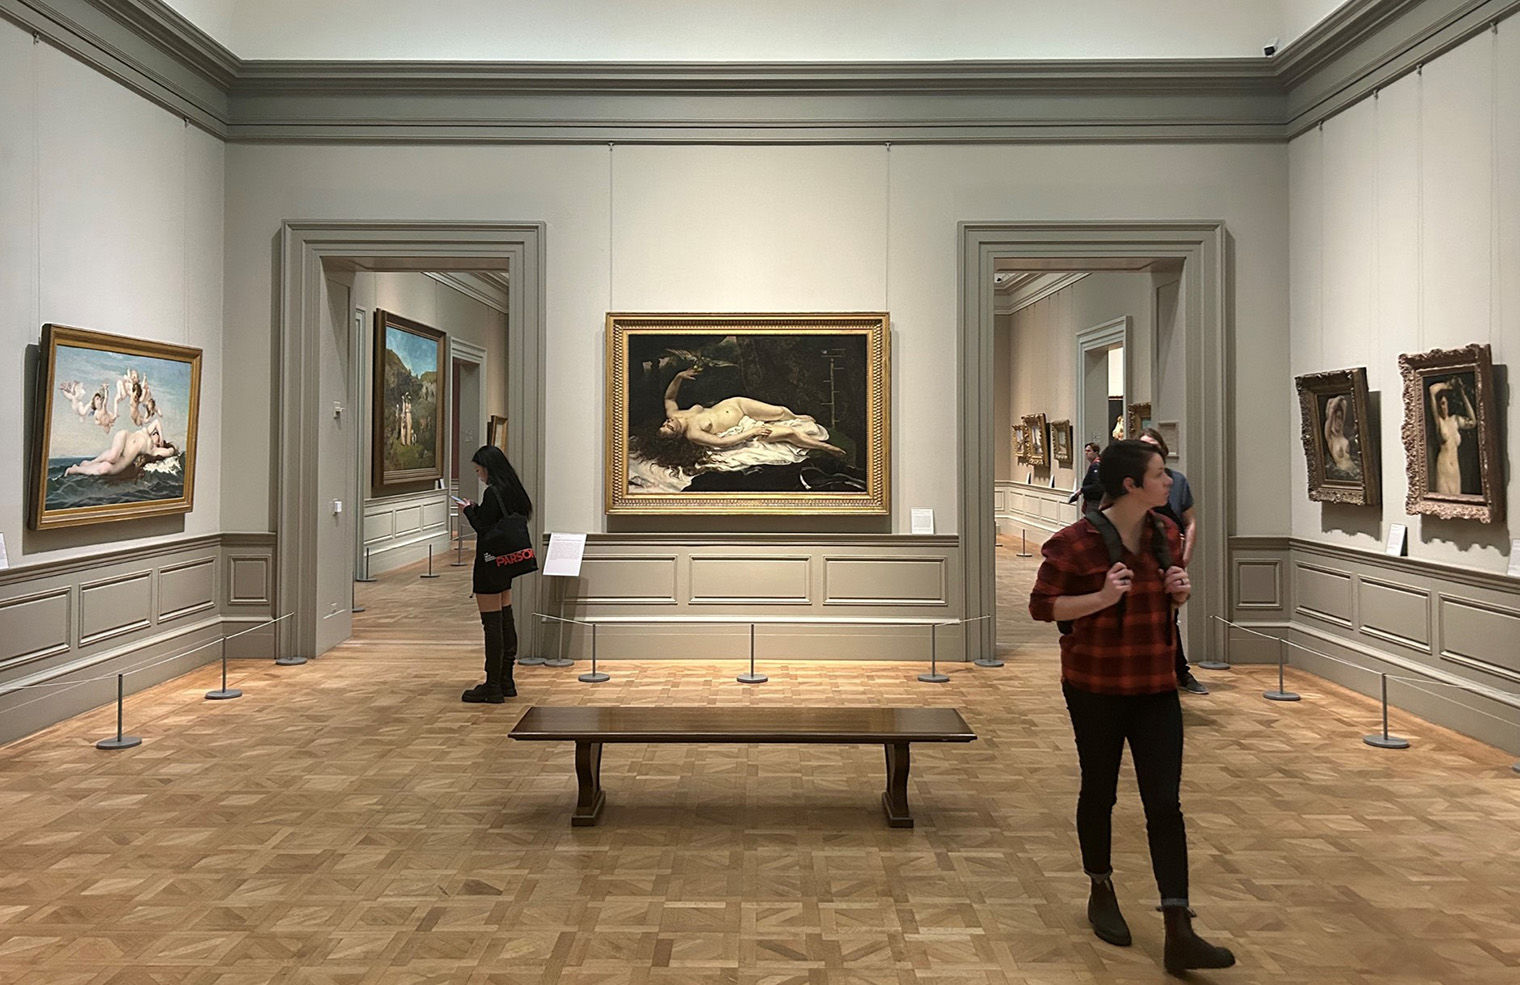 A view of guests looking at artworks in Gallery 811, including Cabanel's "The Birth of Venus", Courbet's "Woman with a Parrot", "The Woman in the Waves", and "Woman with a Flowering Branch".